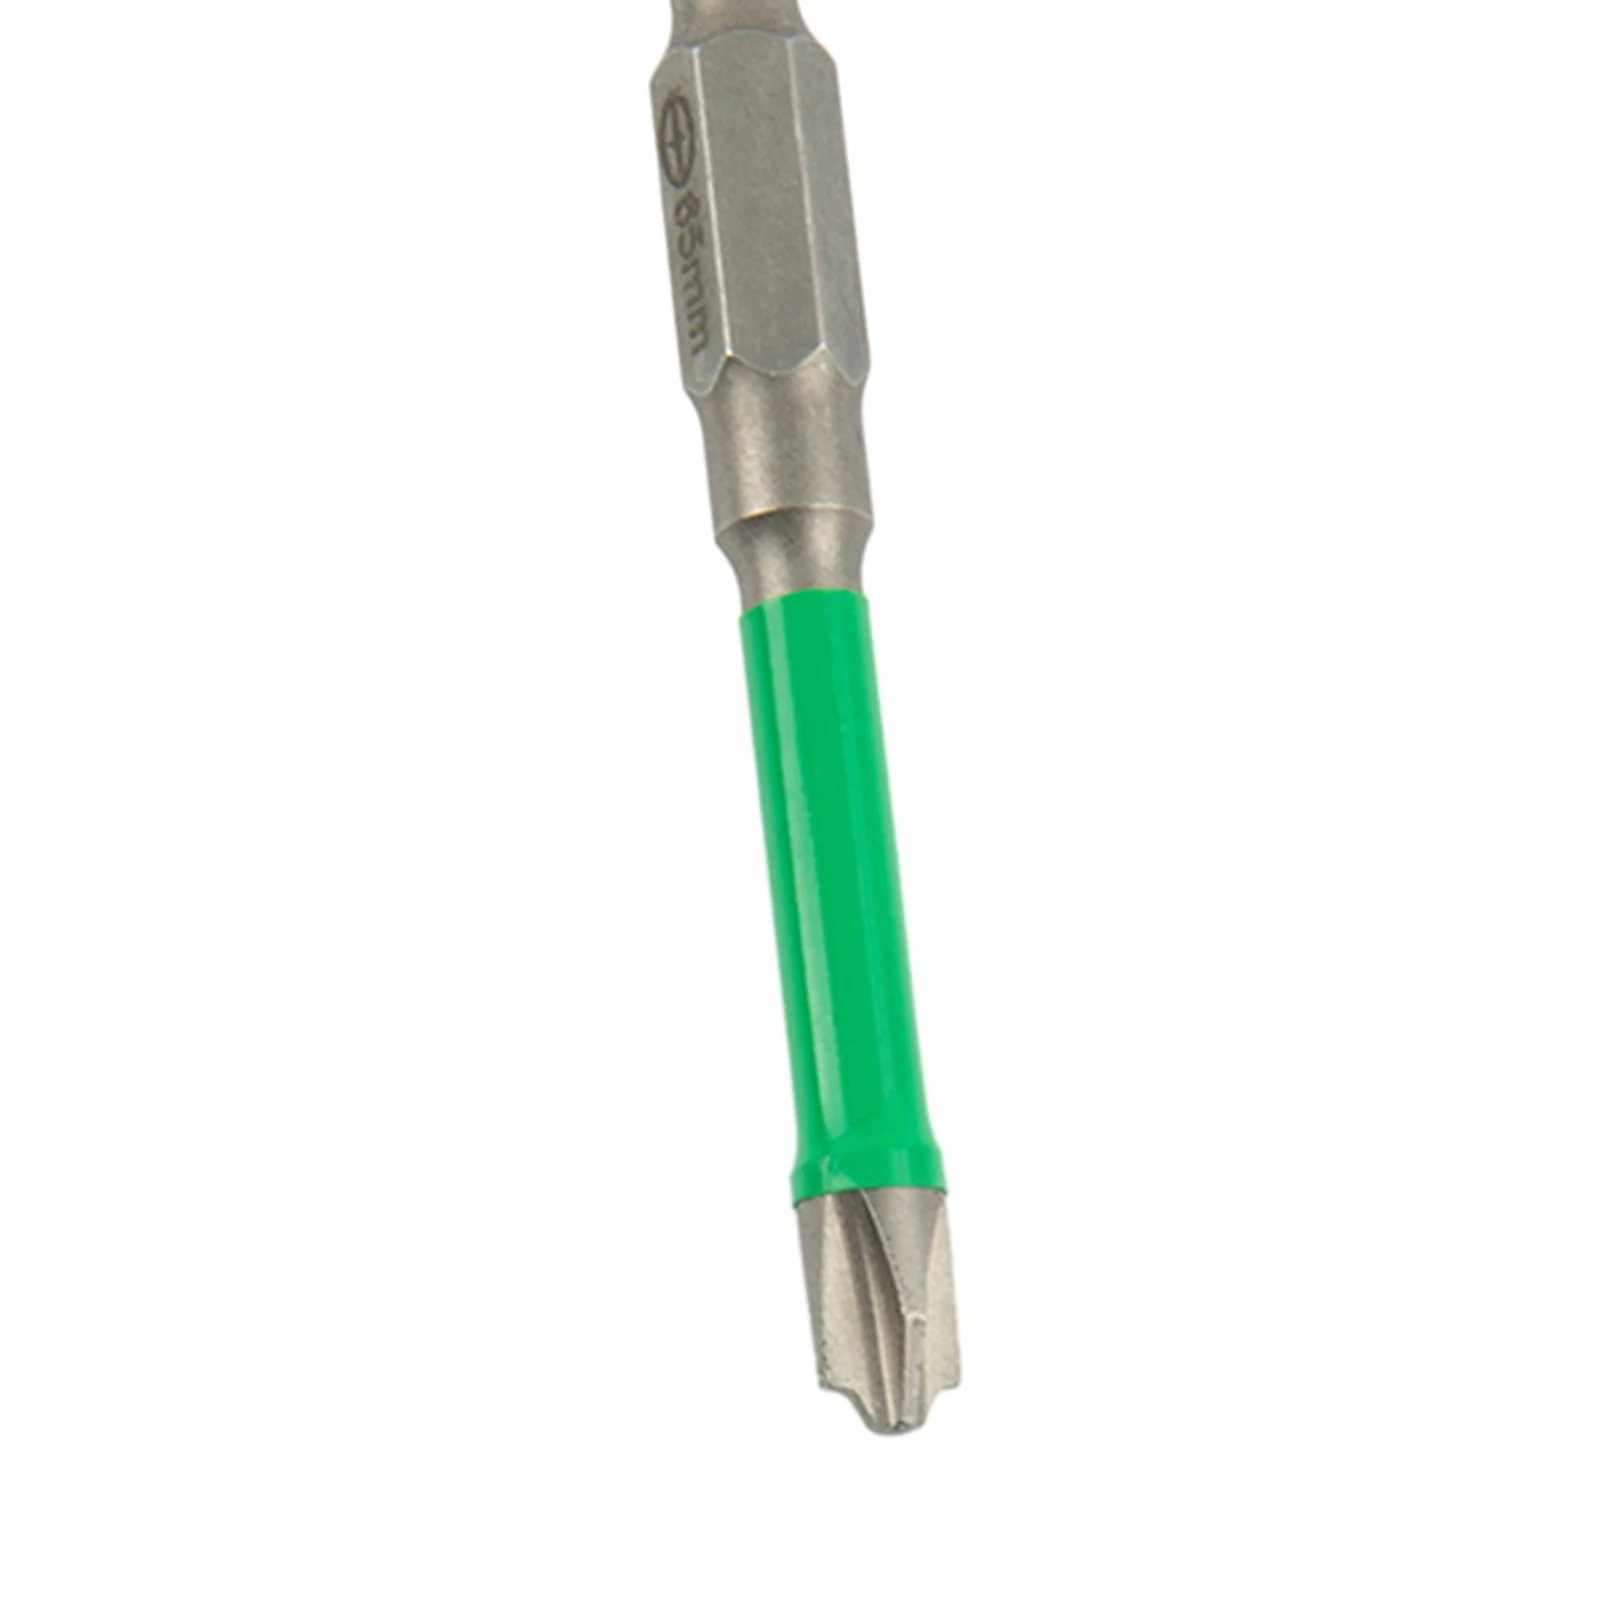 High Hardness Magnetic Special Cross Screwdriver Bit FPH2 55mm Head Option for 65mm/110mm or 65mm+110mm Length for electrician cross screw bit efficient and sturdy special cross screwdriver bit 65mm 110mm for circuit breakers